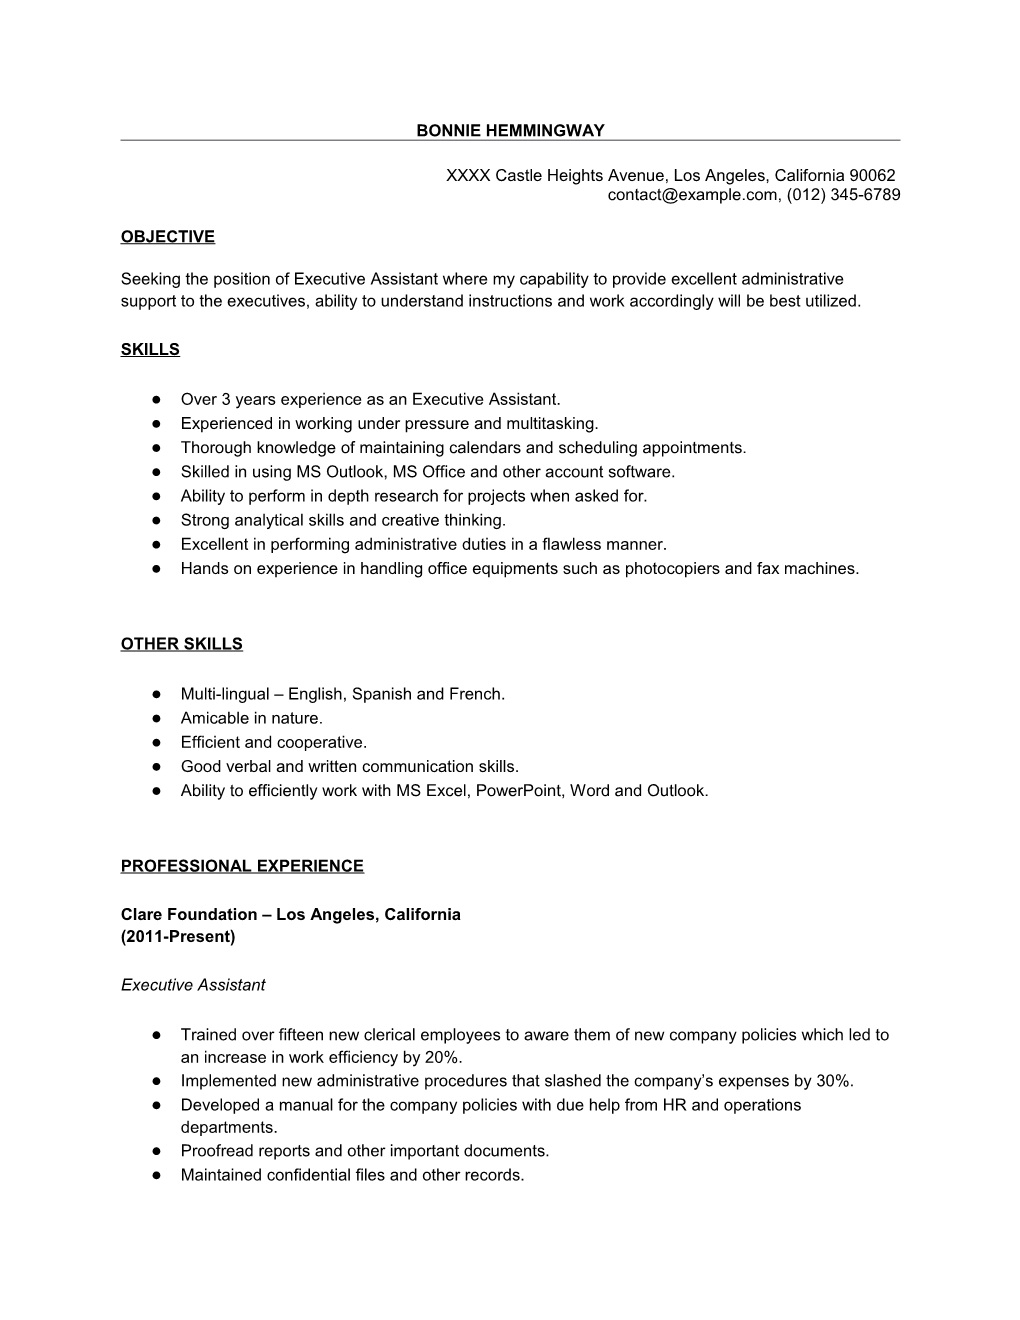 Sample Executive Assistant Resume